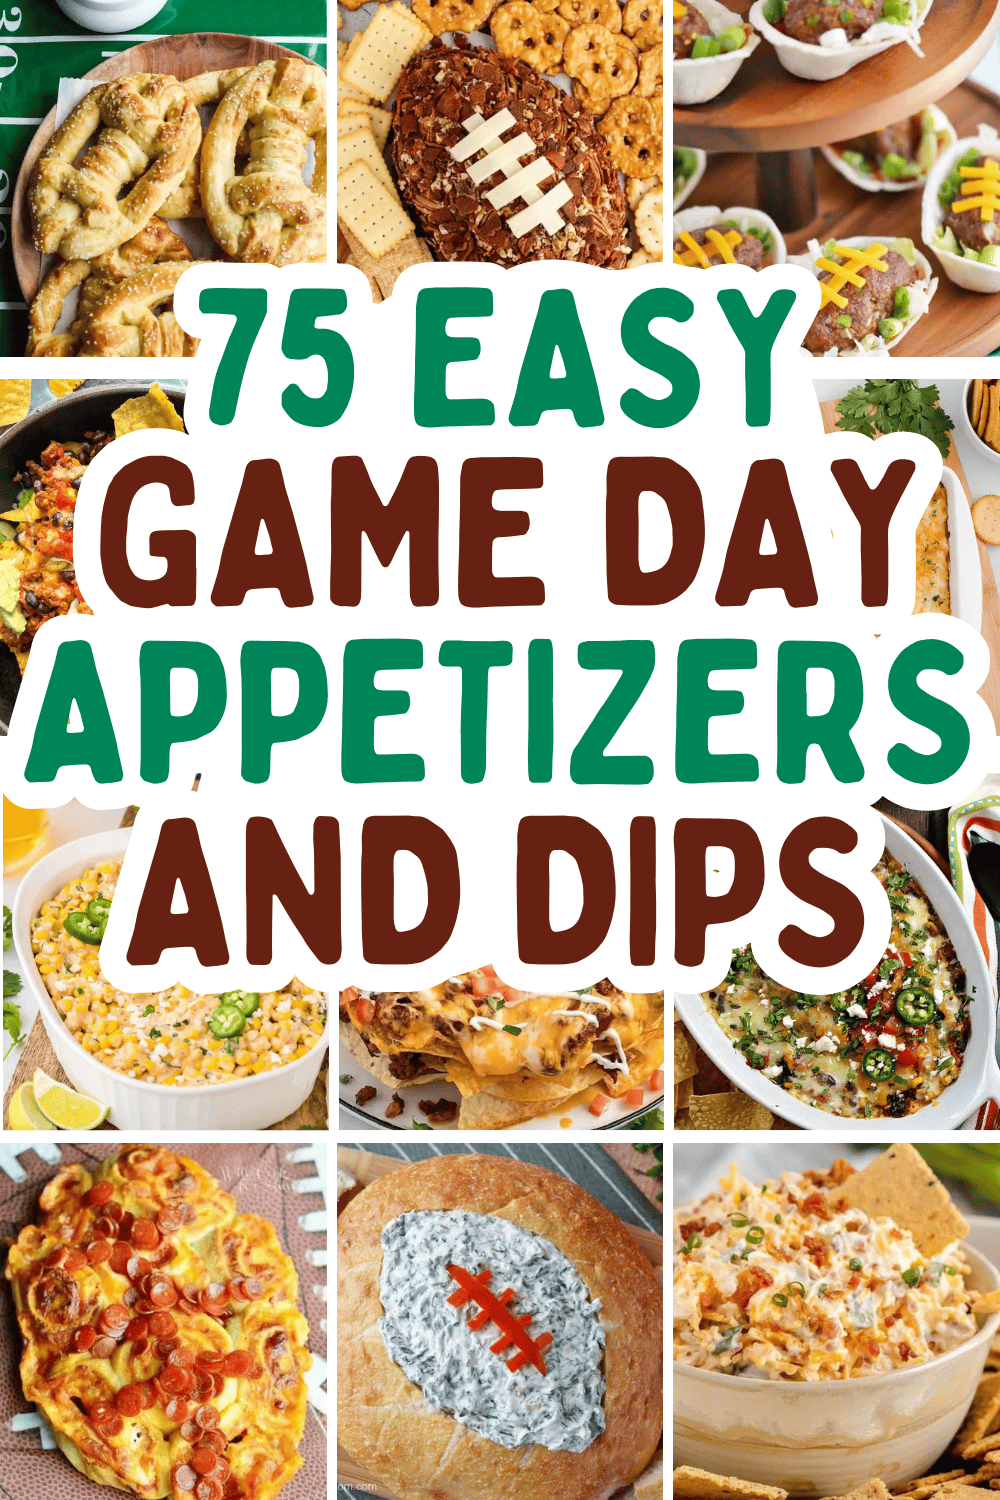 Easy game day appetizers and dips! Make football season or the super bowl game even better with crowd pleasing appetizers. The best make ahead game day food, football Sunday food, best tailgate appetizers, football game snacks appetizers easy, cheap game day appetizers football, game day appetizers easy finger foods, game day quick appetizers, game day appetizers football finger foods party, football party foods appetizers, tailgate appetizers cold, football themed food, football food appetizers